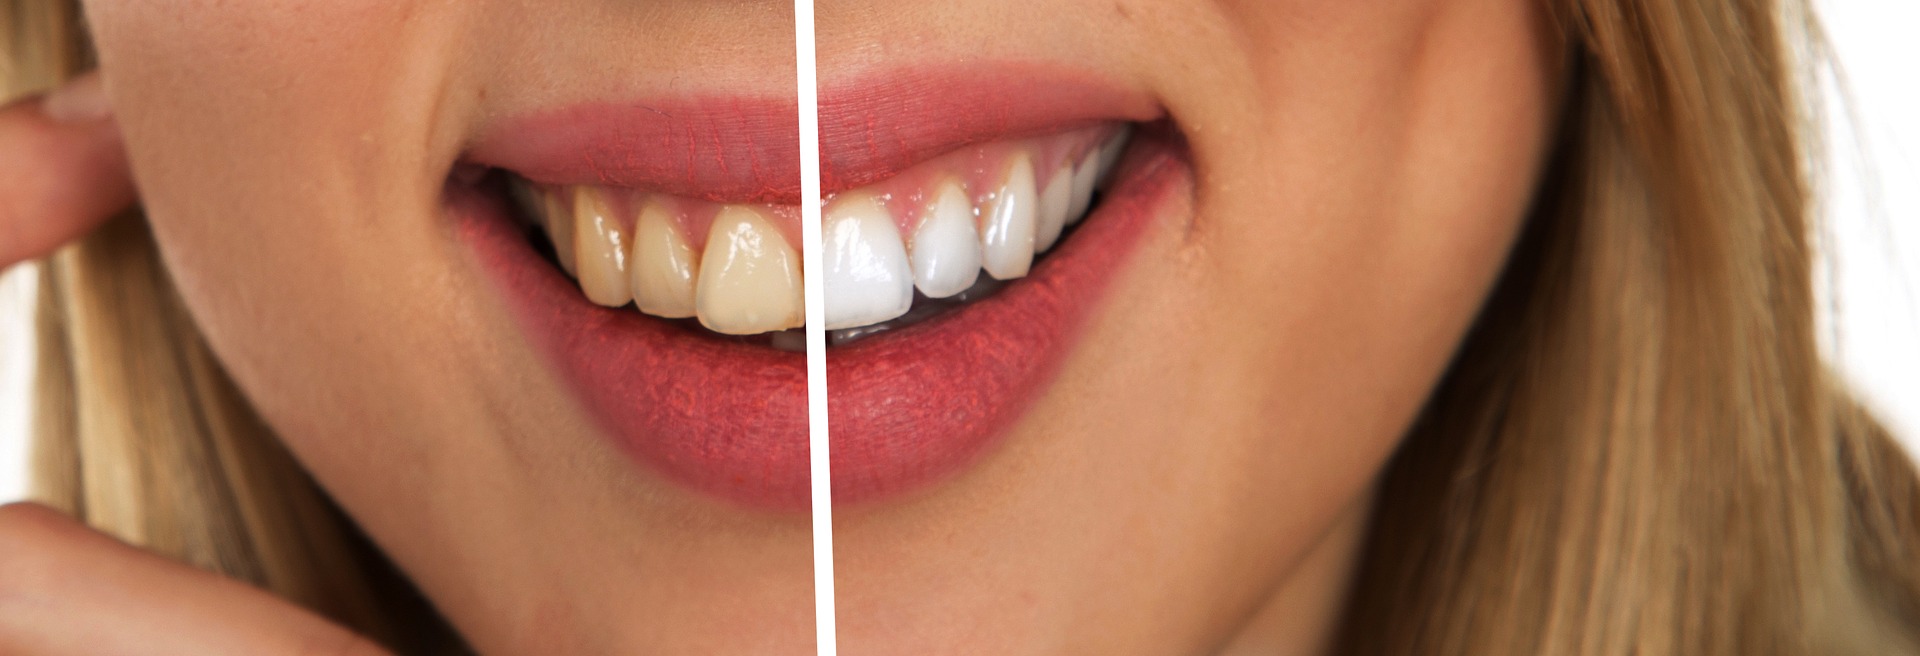 Professional Teeth Whitening for Professional Results